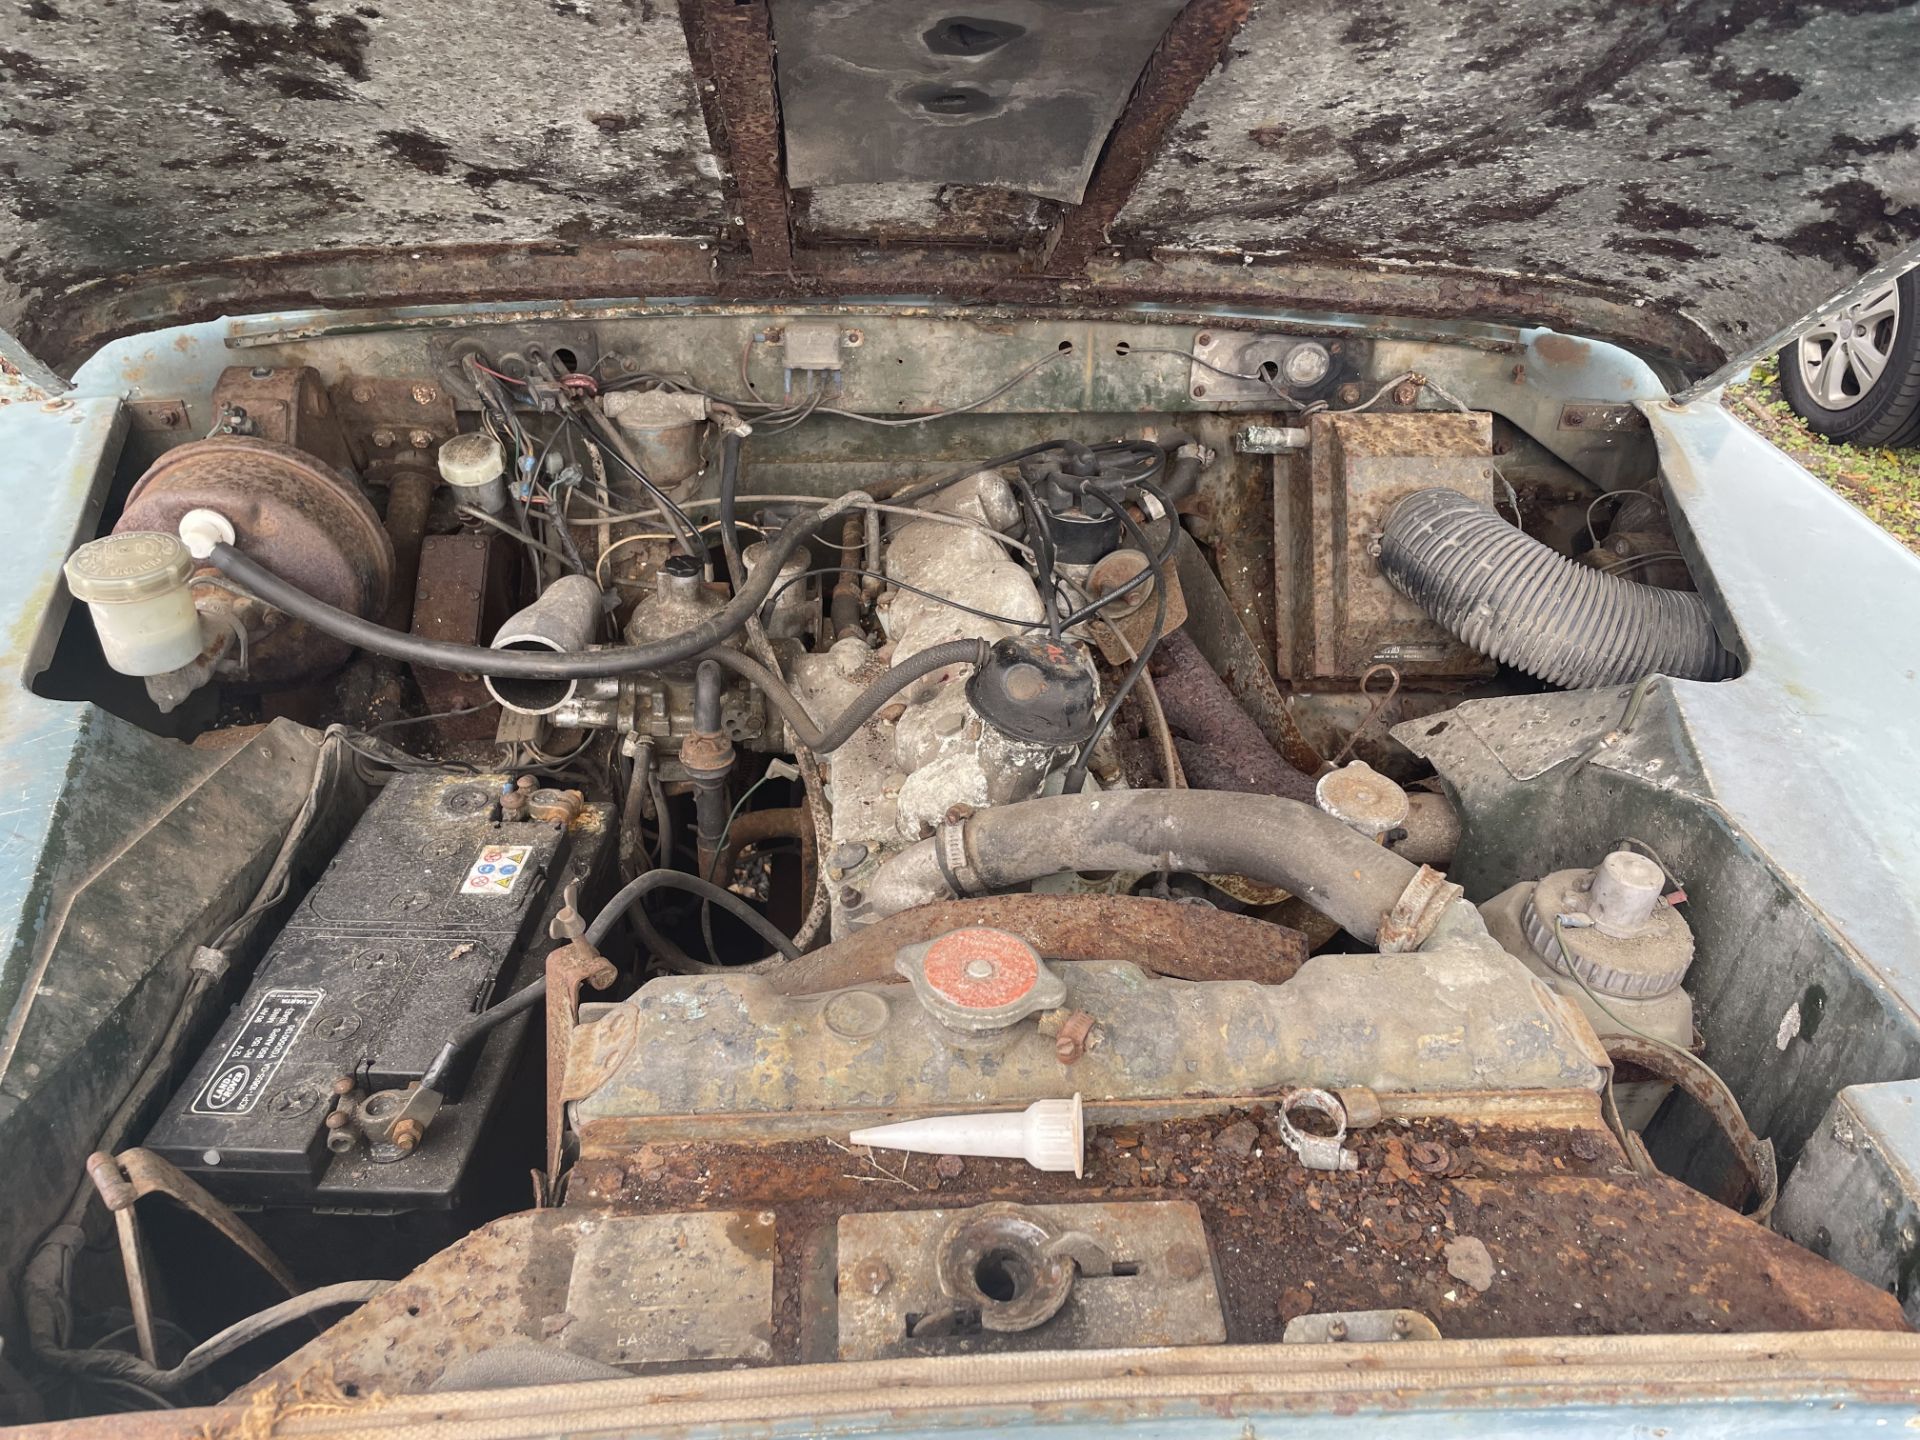 1973 Land Rover Series III 109 6 Cylinder Recovery" - Image 8 of 8